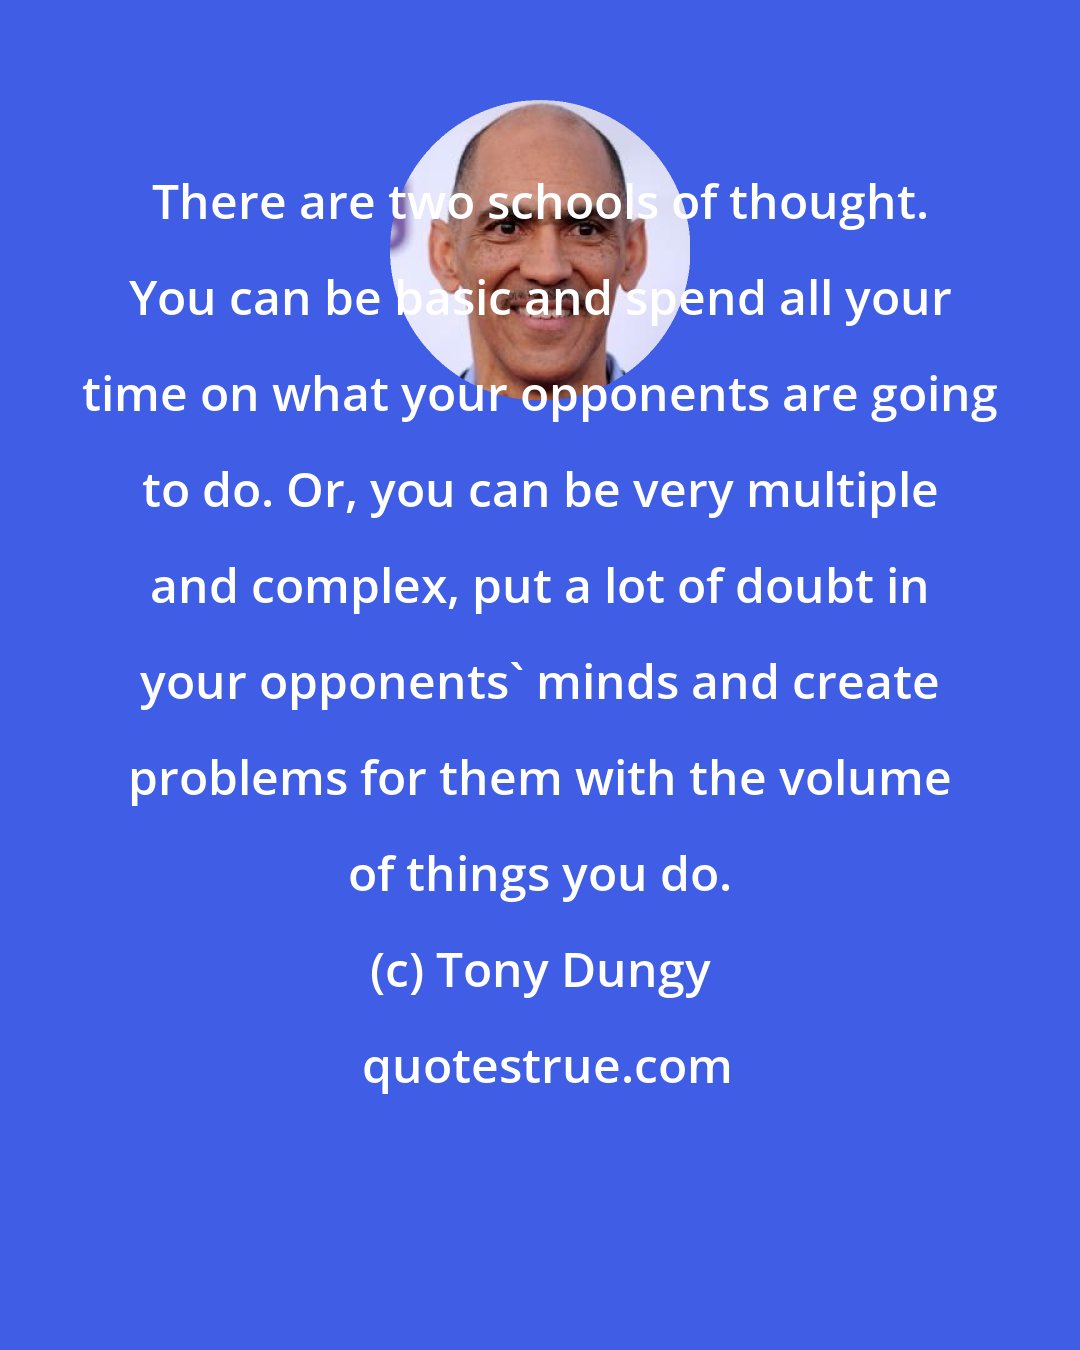 Tony Dungy: There are two schools of thought. You can be basic and spend all your time on what your opponents are going to do. Or, you can be very multiple and complex, put a lot of doubt in your opponents' minds and create problems for them with the volume of things you do.